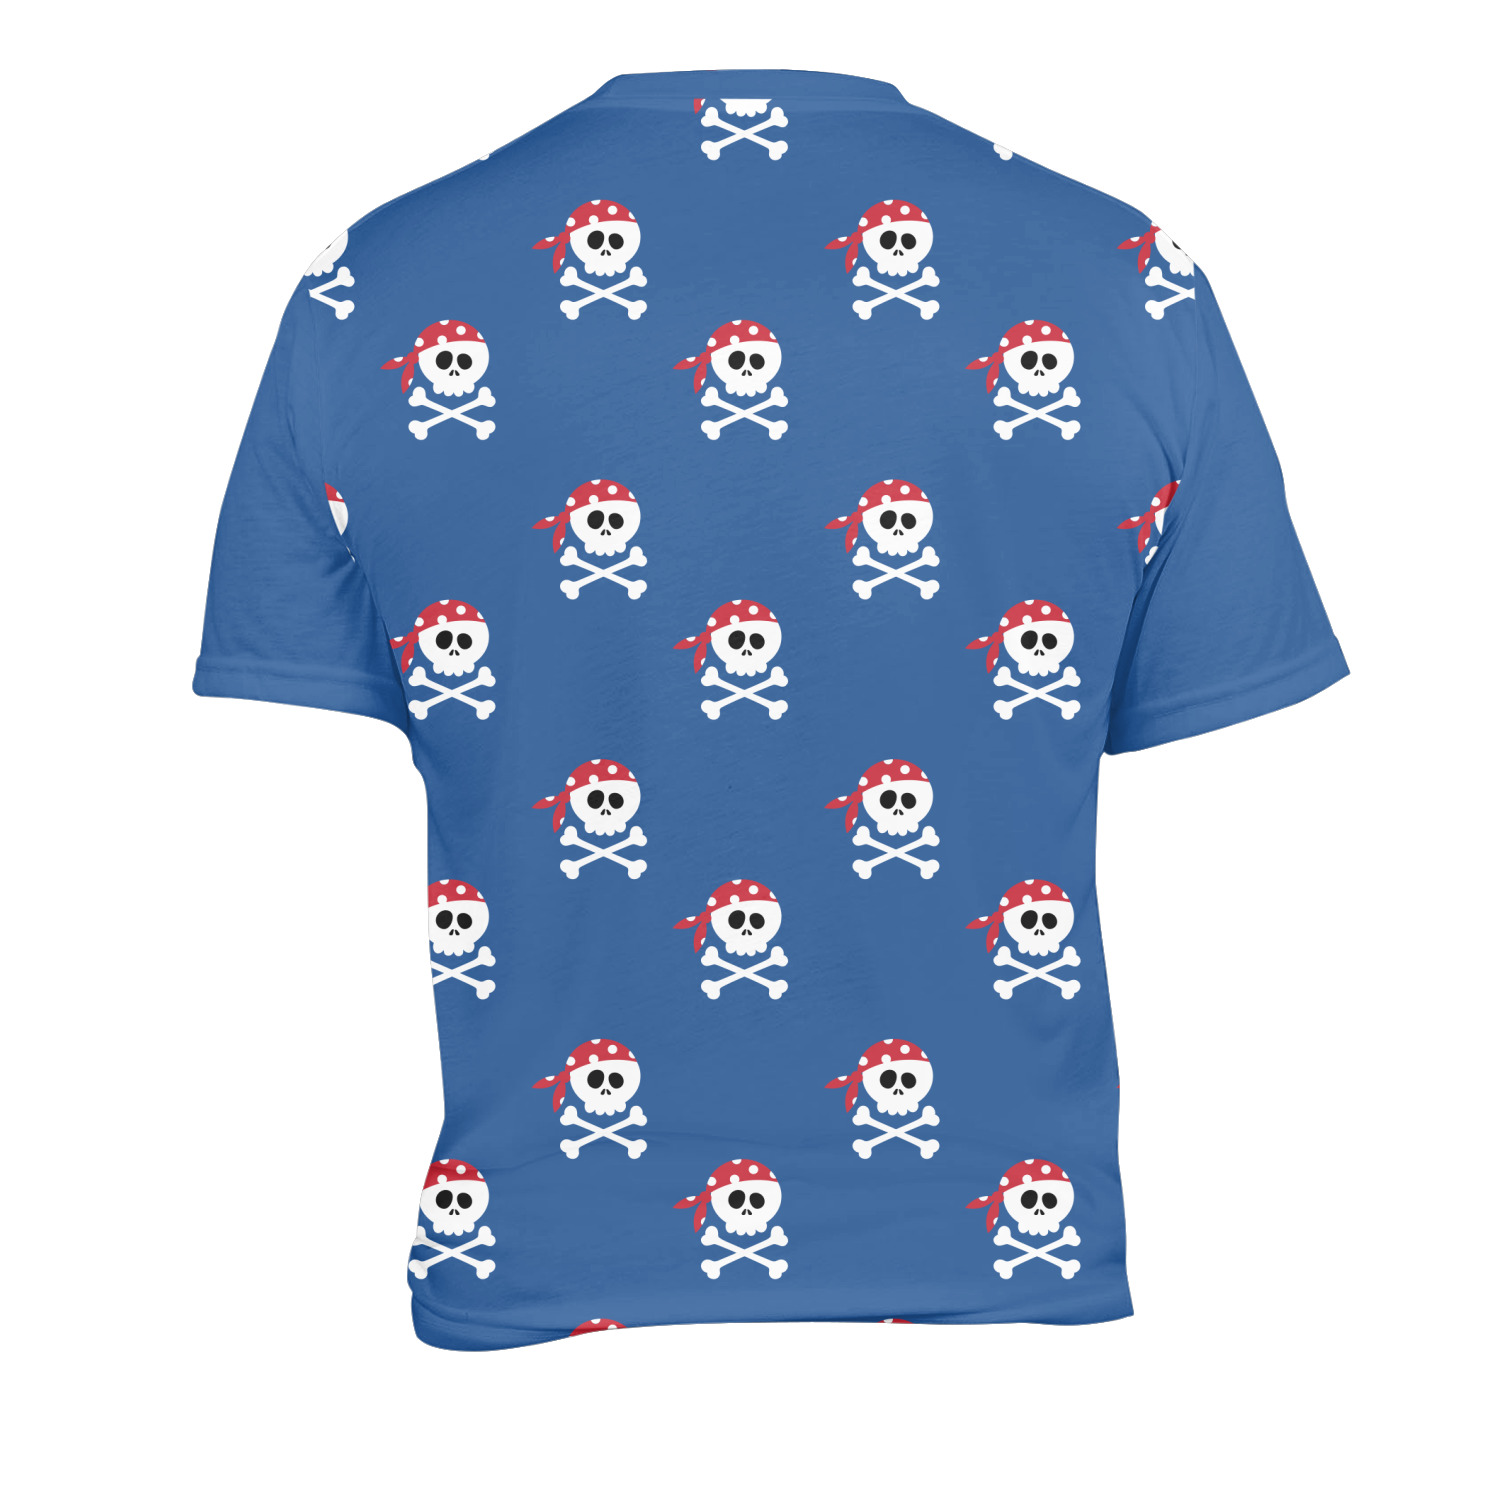 Blue Pirate Men's Crew T-Shirt - Large (Personalized) - YouCustomizeIt